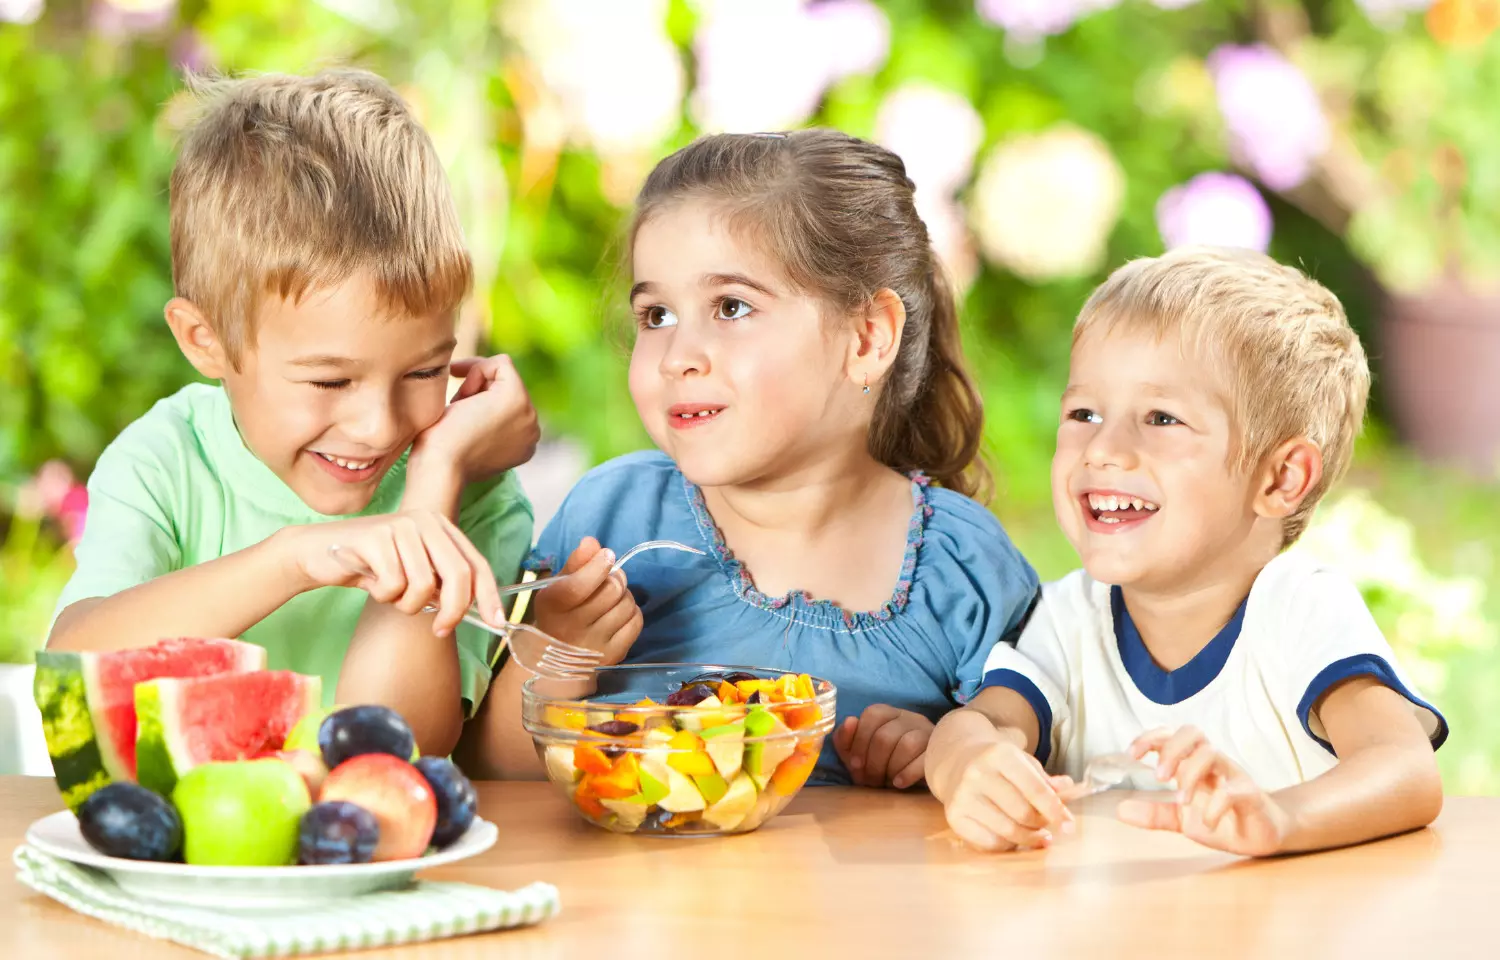 Kids on vegetarian diet have similar growth and nutrition compared to children who eat meat